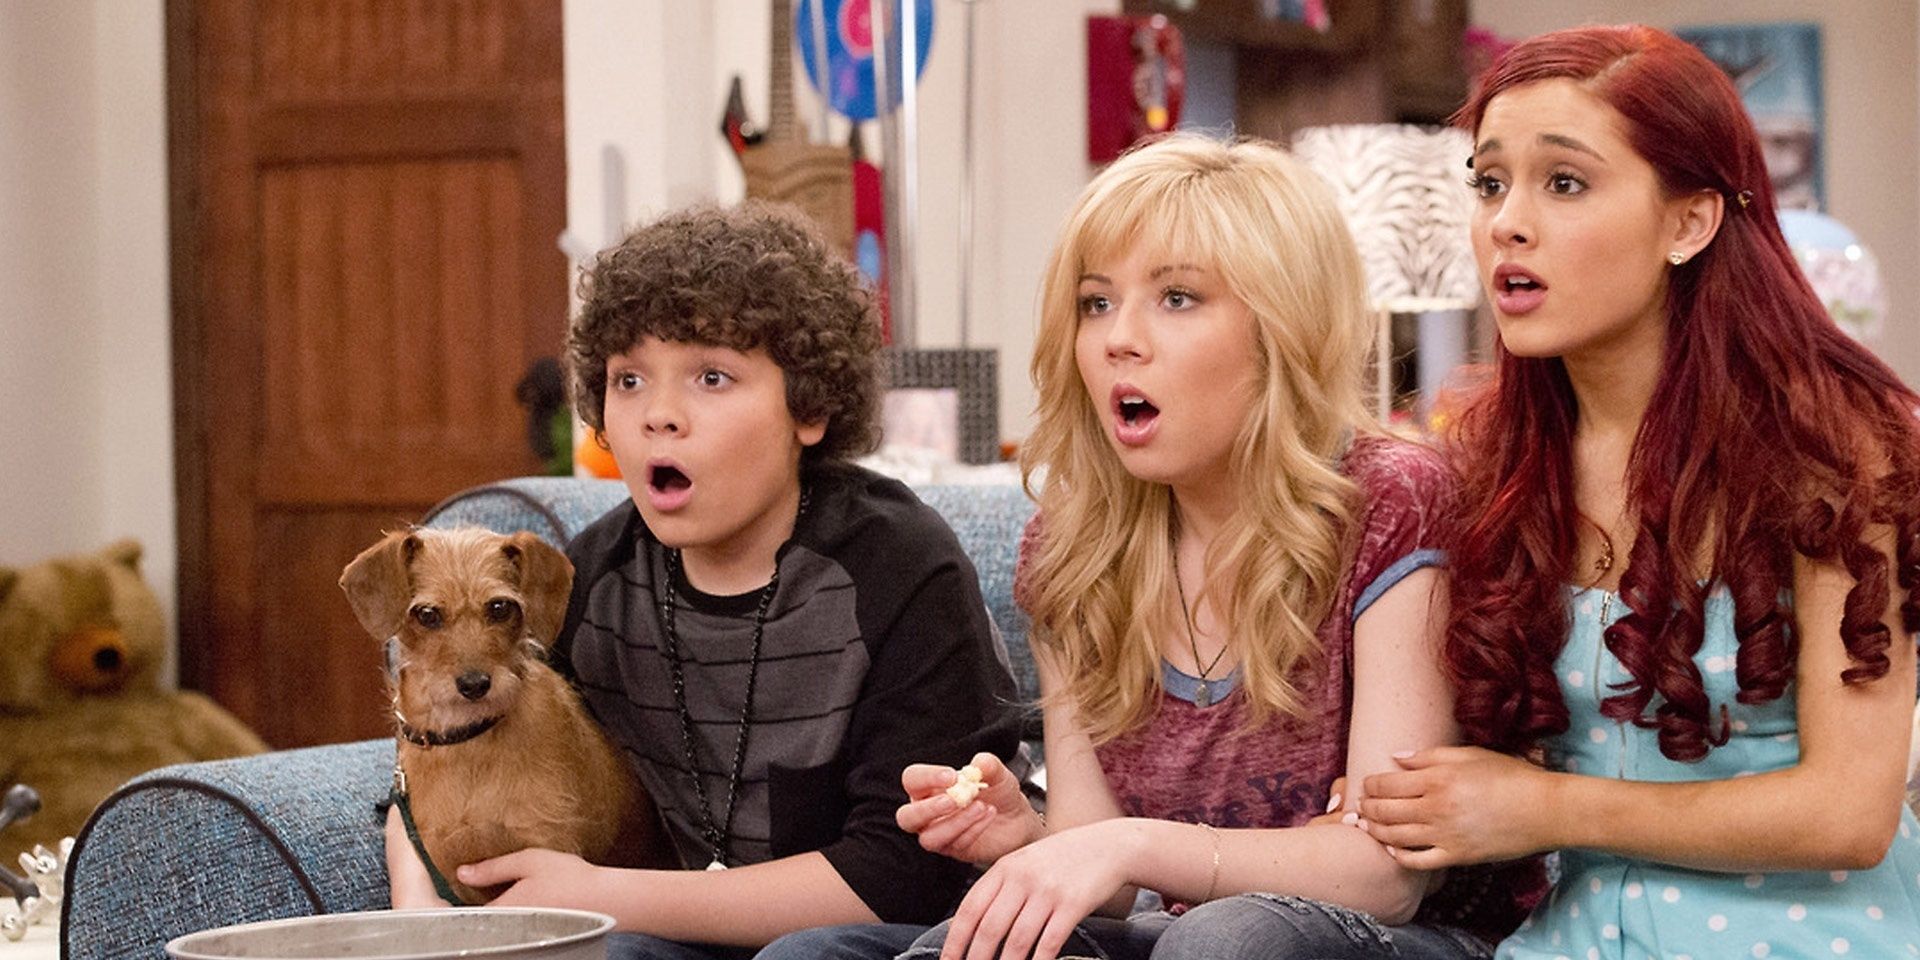 Deuce, Sam, and Cat on the couch with a dog and a bowl of popcorn appearing shocked in Sam and Cat